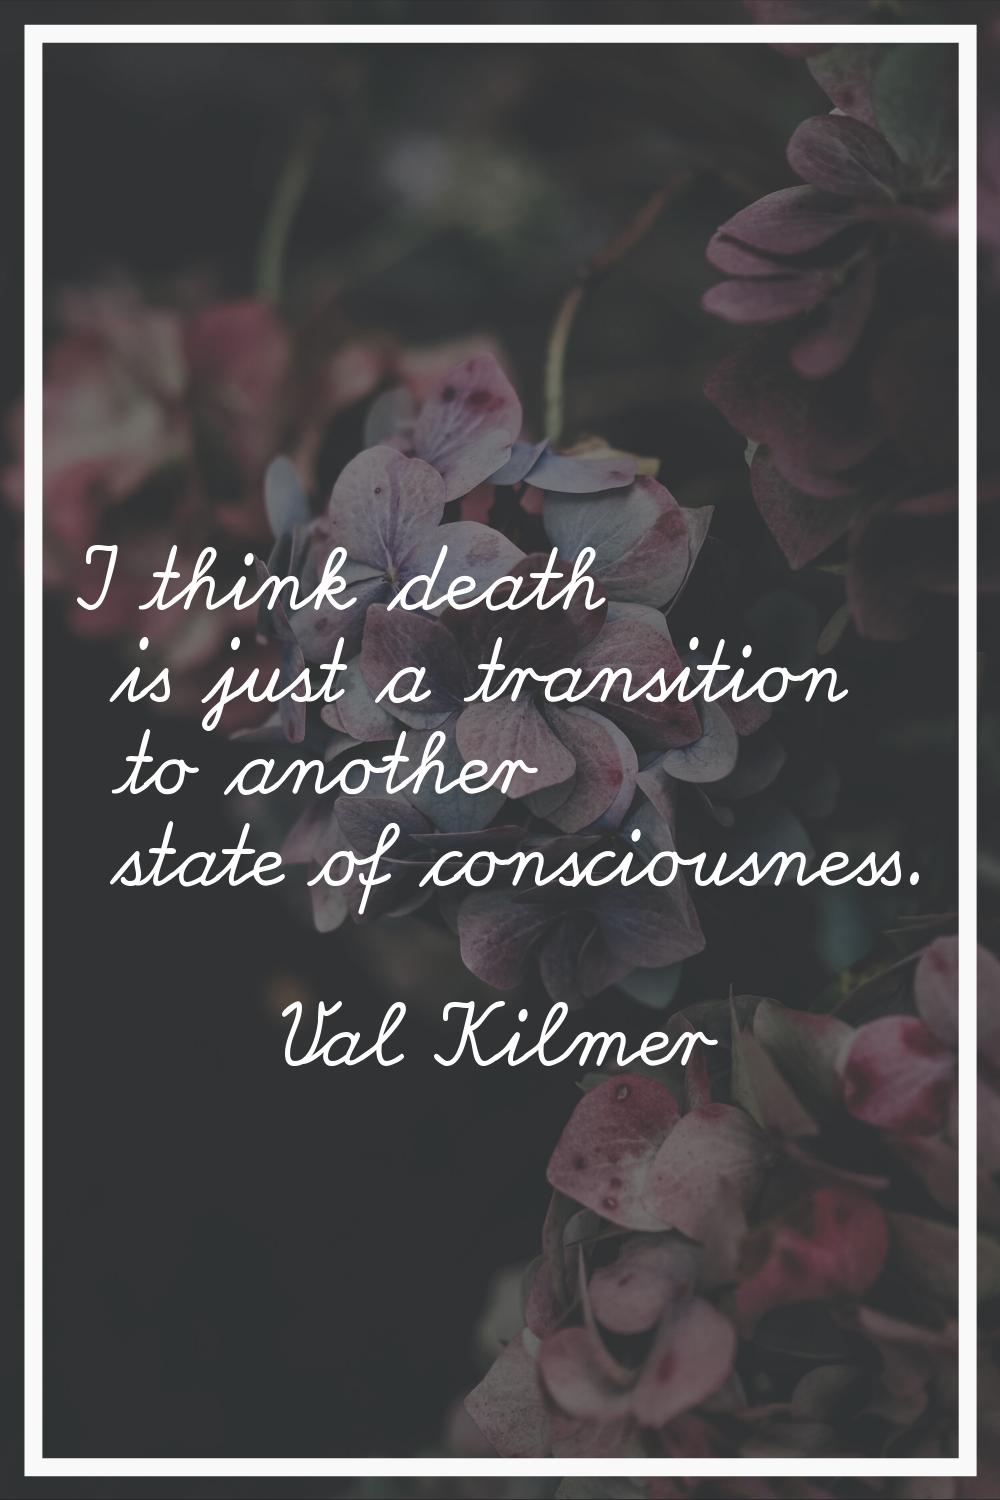 I think death is just a transition to another state of consciousness.